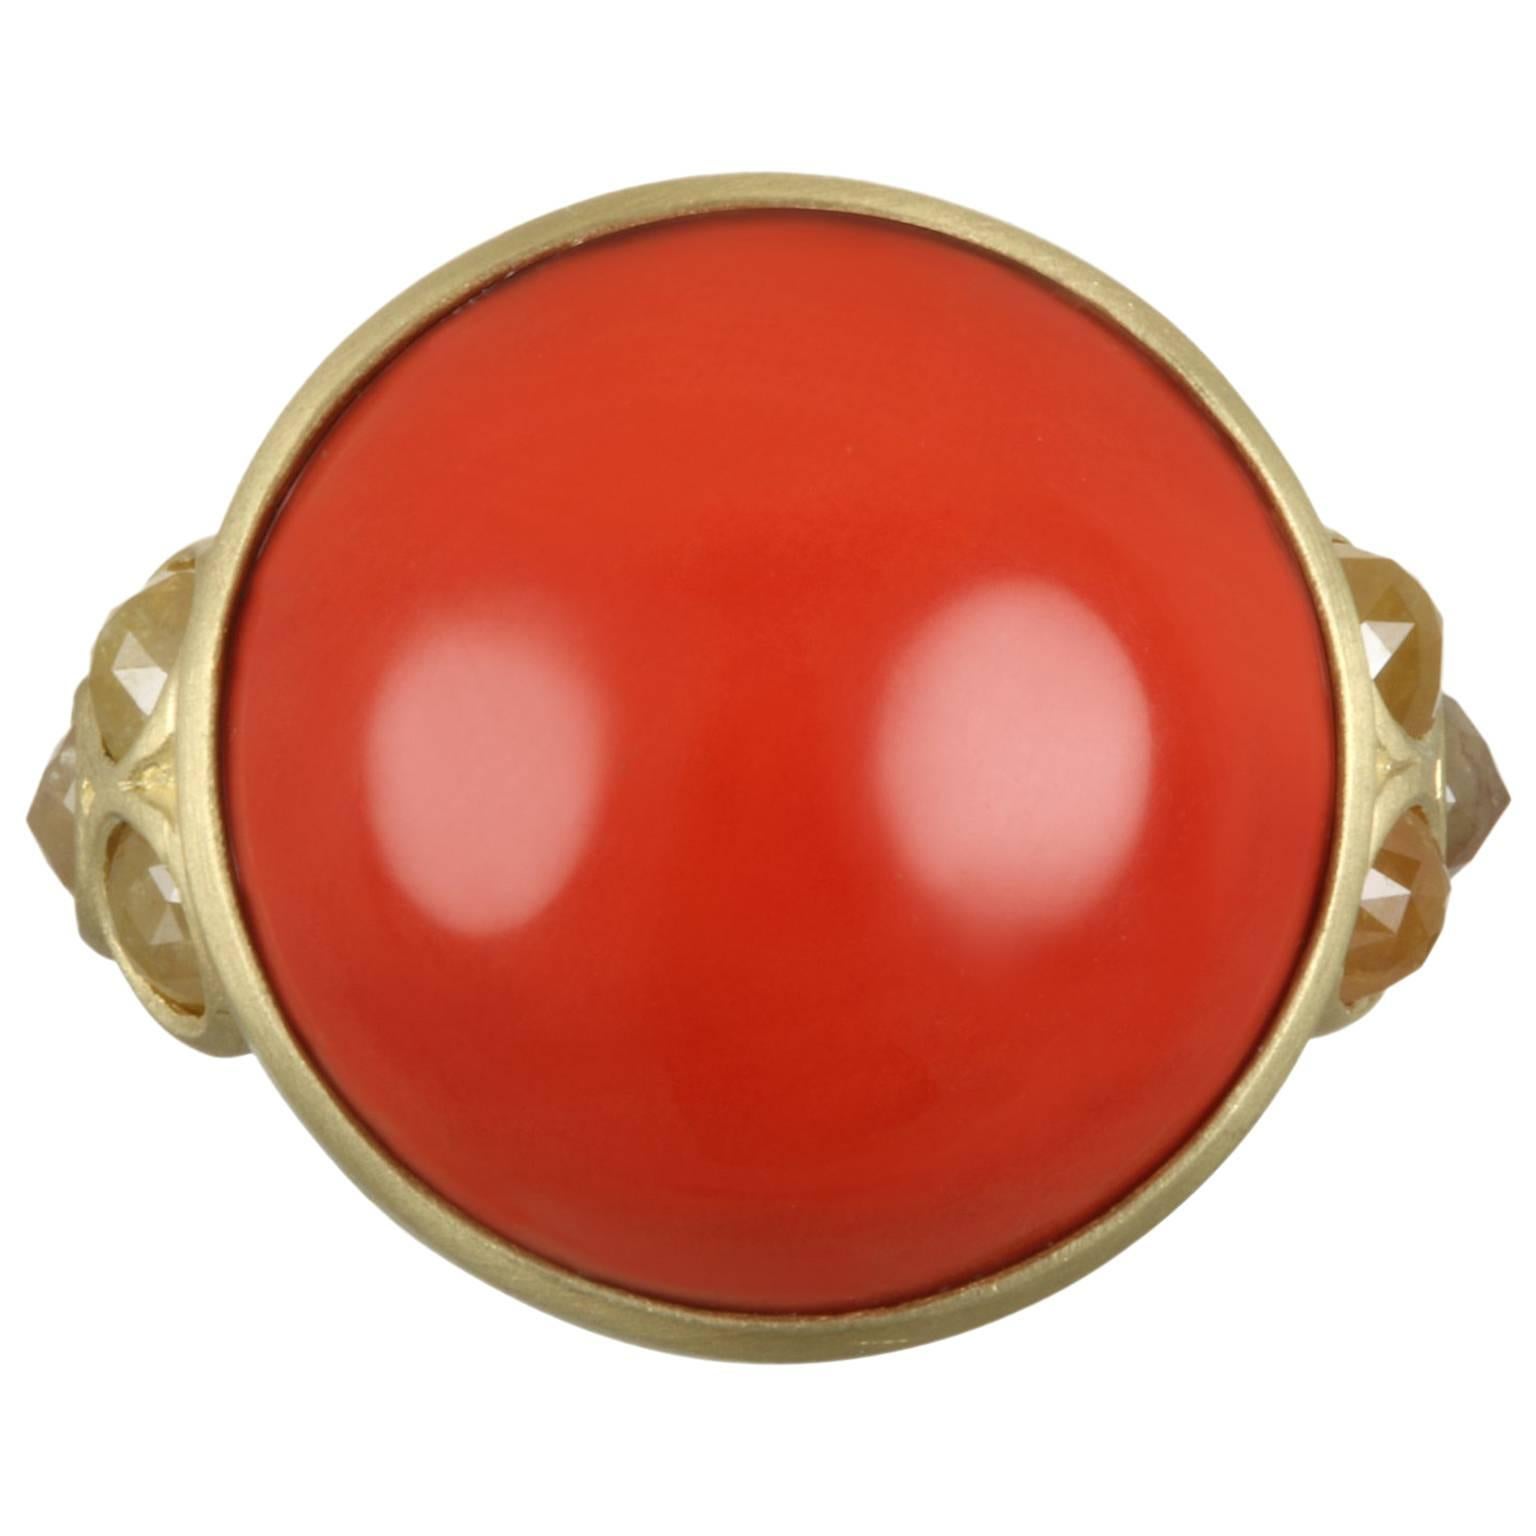 Faye Kim's 18k gold fiery red Coral ring touches all of your senses.  Beautifully handcrafted and accented with triple raw diamond granulation detail. One of a kind.
Coral:  17MM
Size 7.

Made in the USA